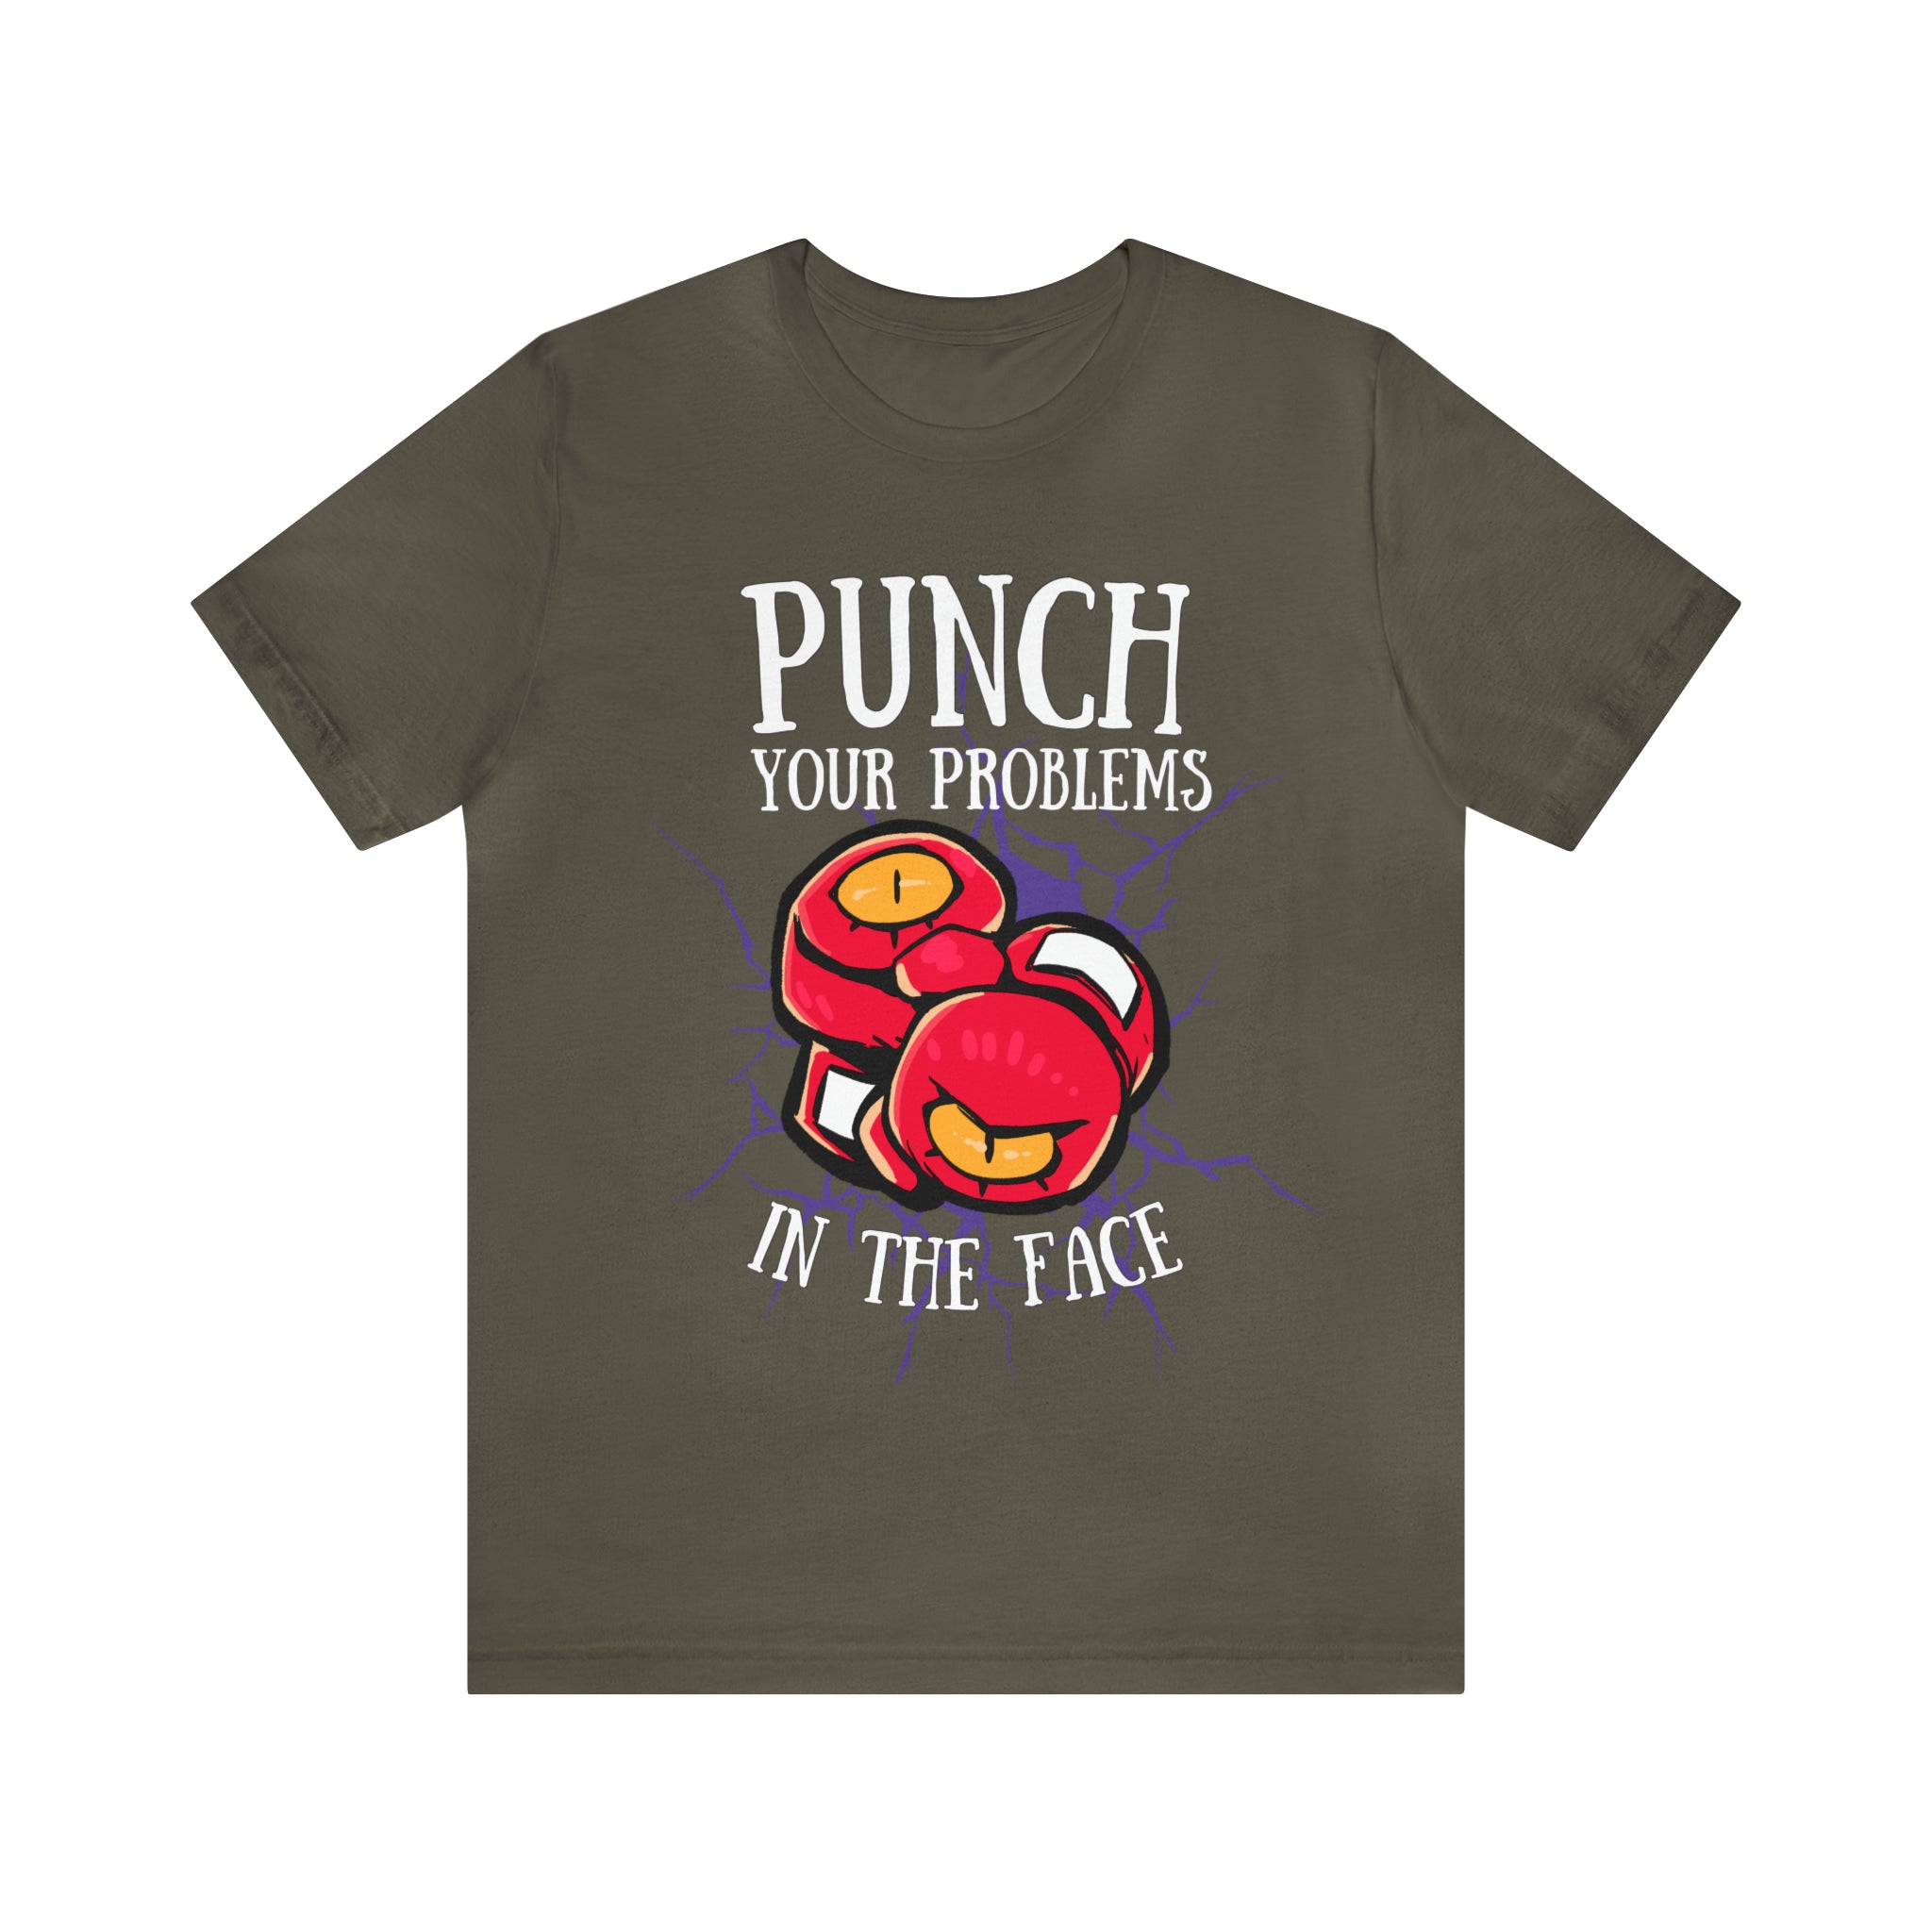 Punch Your Problems Tee